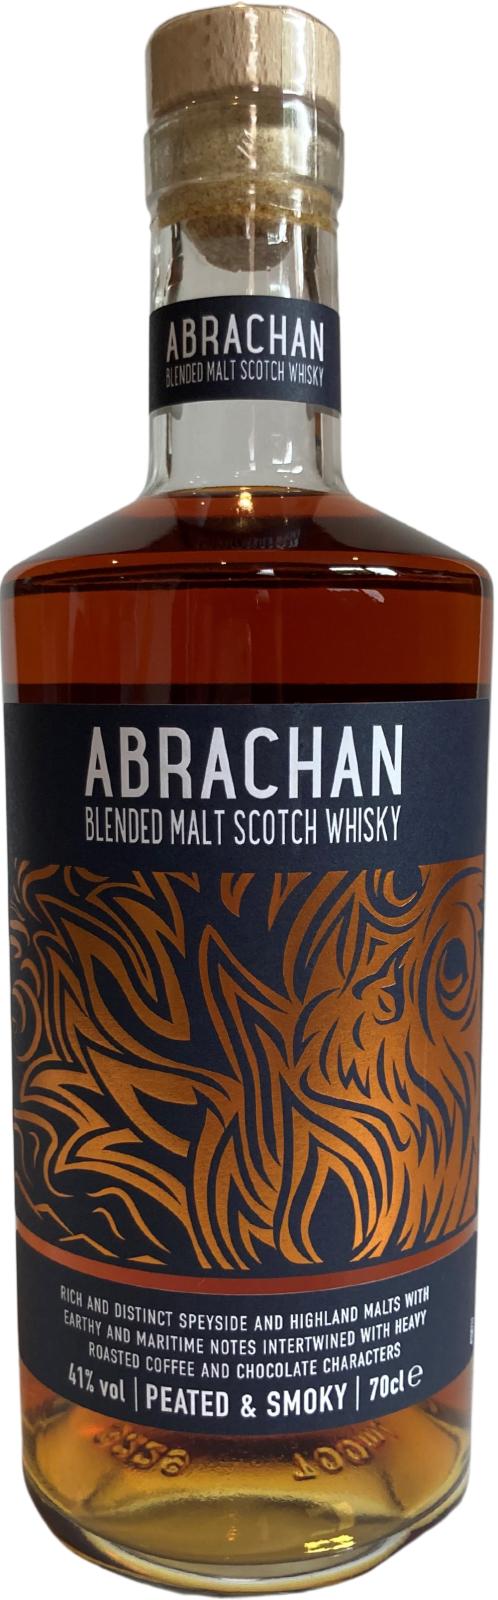 - Ratings Smoky Cd Whiskybase - and Peated reviews & Abrachan